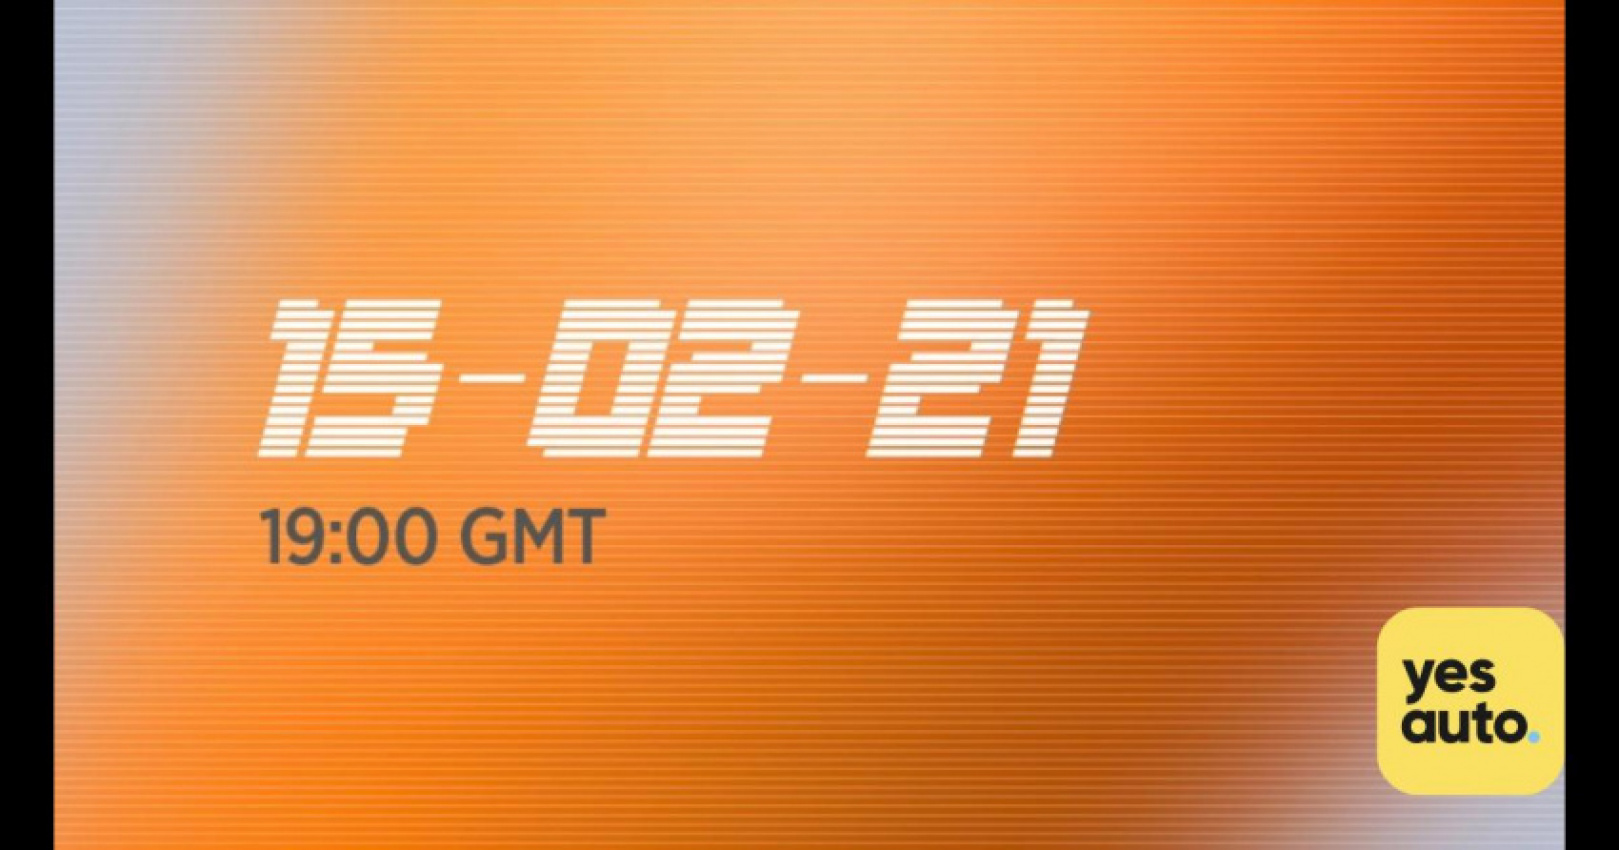 autos, cars, mclaren, car news, motorsport, what to expect from the live 2021 mclaren f1 car reveal